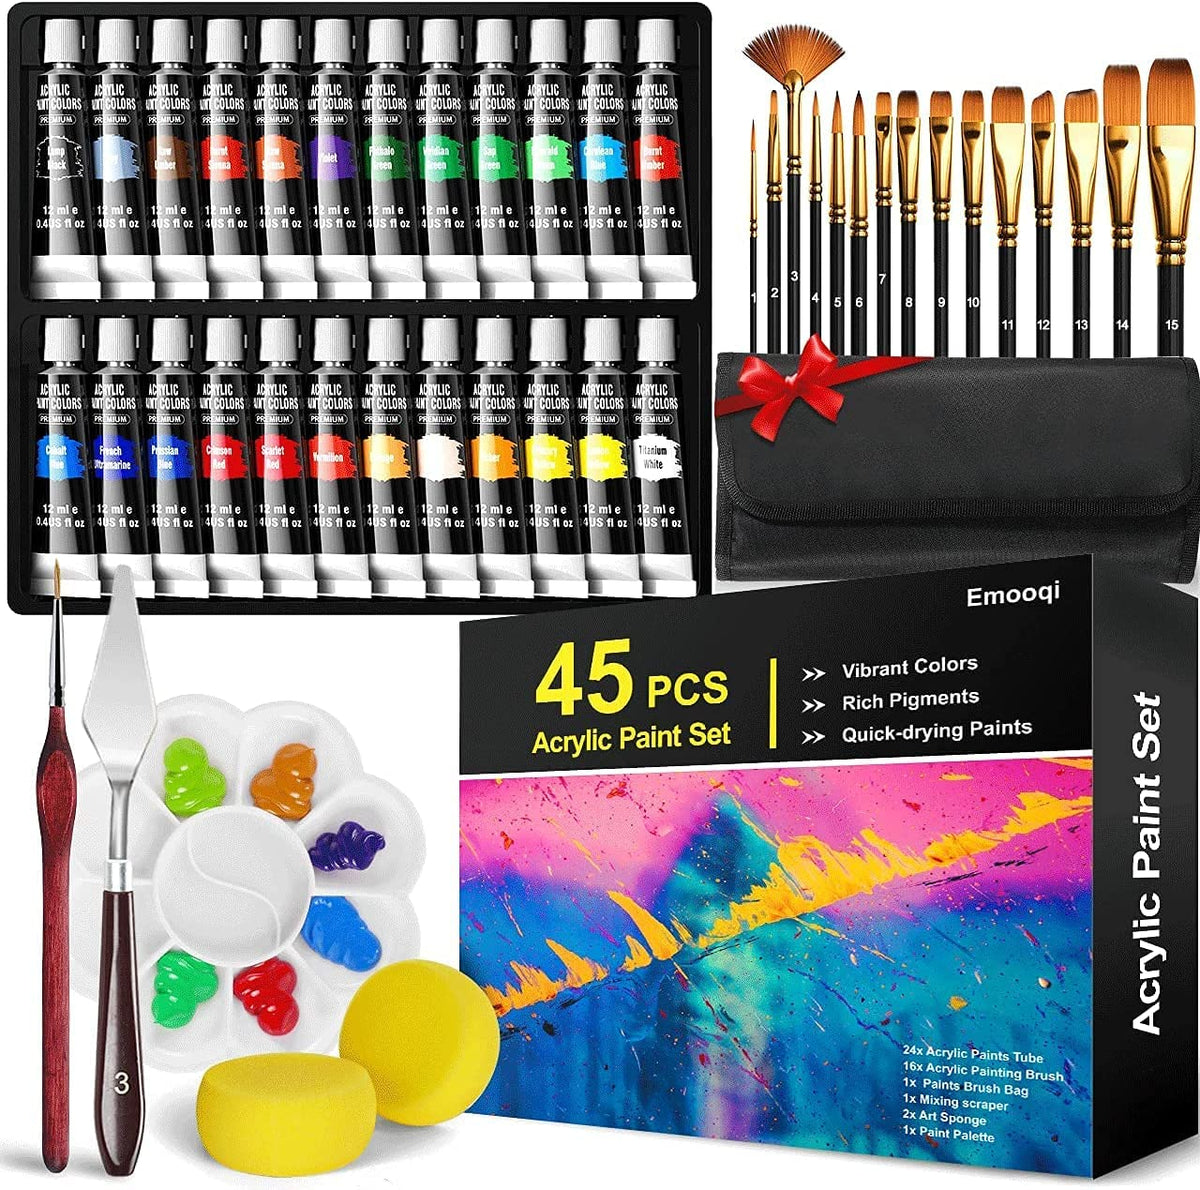 Crafts 4 All Acrylic Paint Set for Adults and Kids - 24-Pack of 12Ml Paints  for Canvas, Wood & Ceramic W/ 3 Art Brushes - Non-Toxic Craft Paint Sets 